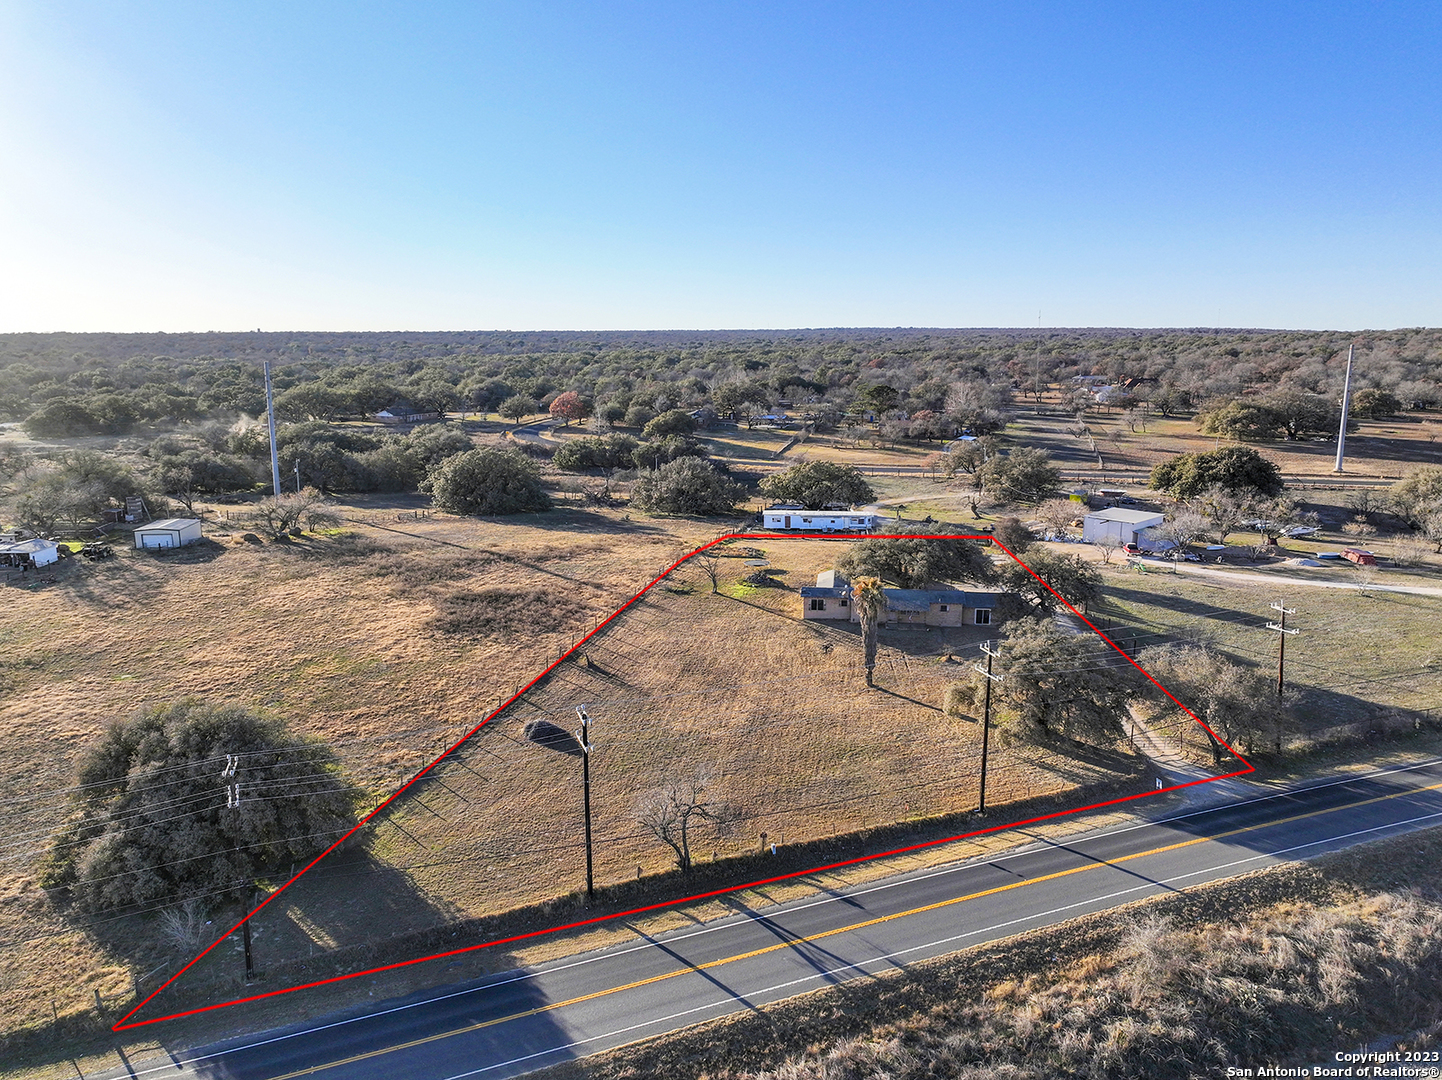 Priced Reduce! 1.65 acres of peacefulness. Have you thought about having goats or chickens or farm animals? Don't want to hear your neighbors TV? Then this is the spot for you! Smell the fresh hill county air, situated outside 1604, 28 mins to downtown San Antonio and 15 minutes to Texas A&M San Antonio University. Three bedrooms including a primary suite with walk in closet and dual sinks. Guess bath to include a tub/shower combo and single vanity. In house Laundry room with multiple shelves great for storage. Two bonus rooms, one converted into a BAR, and the other it's up to you to get creative. Don't miss the chance to own this unique opportunity. Schedule your showing today!